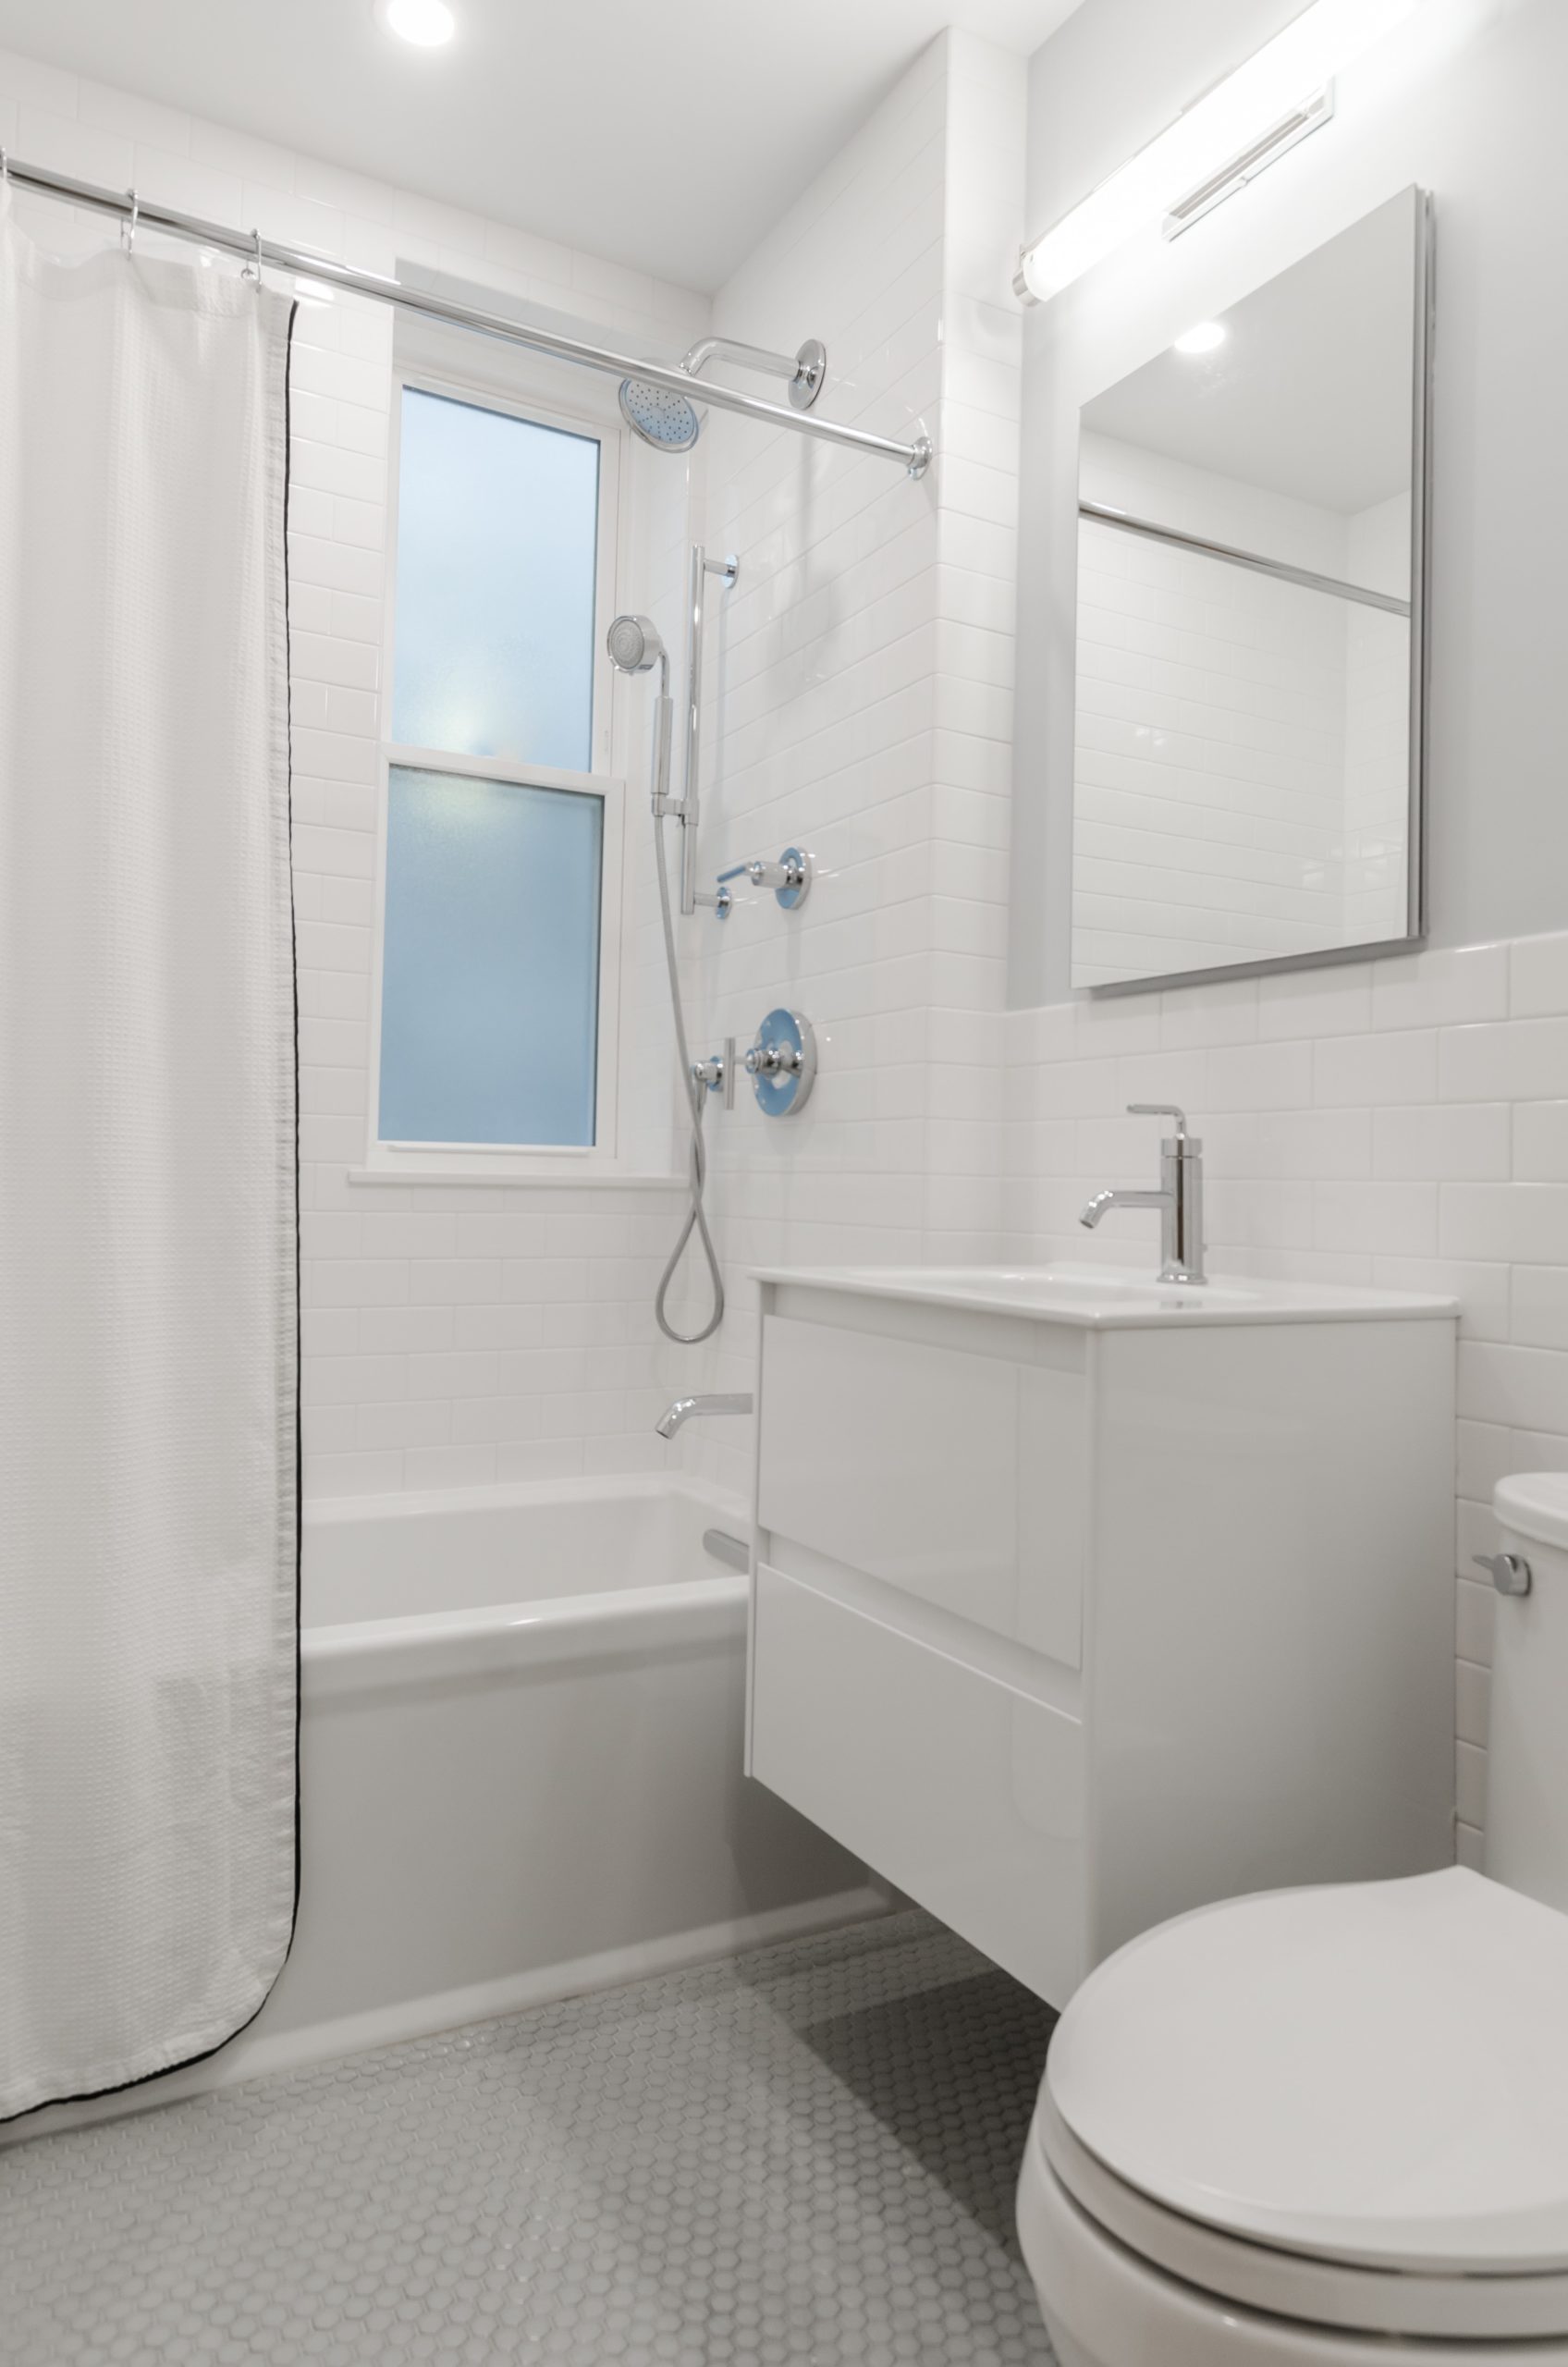 Acrylic vs. Fiberglass shower pans Which is better featured image